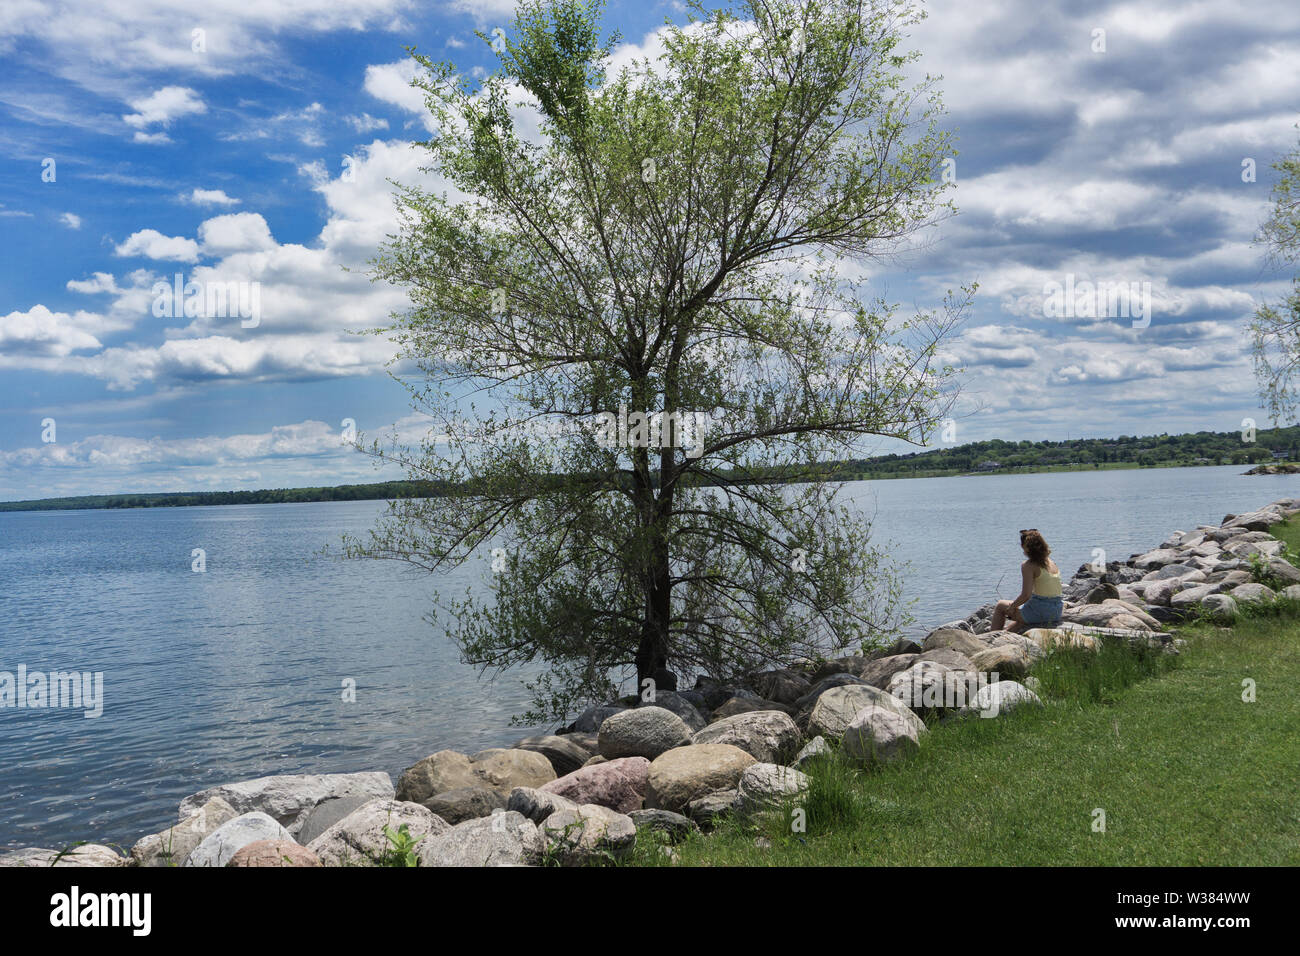 Canada Ontario Barrie at June 2019, Lunch break in the park, a woman is relaxing Stock Photo